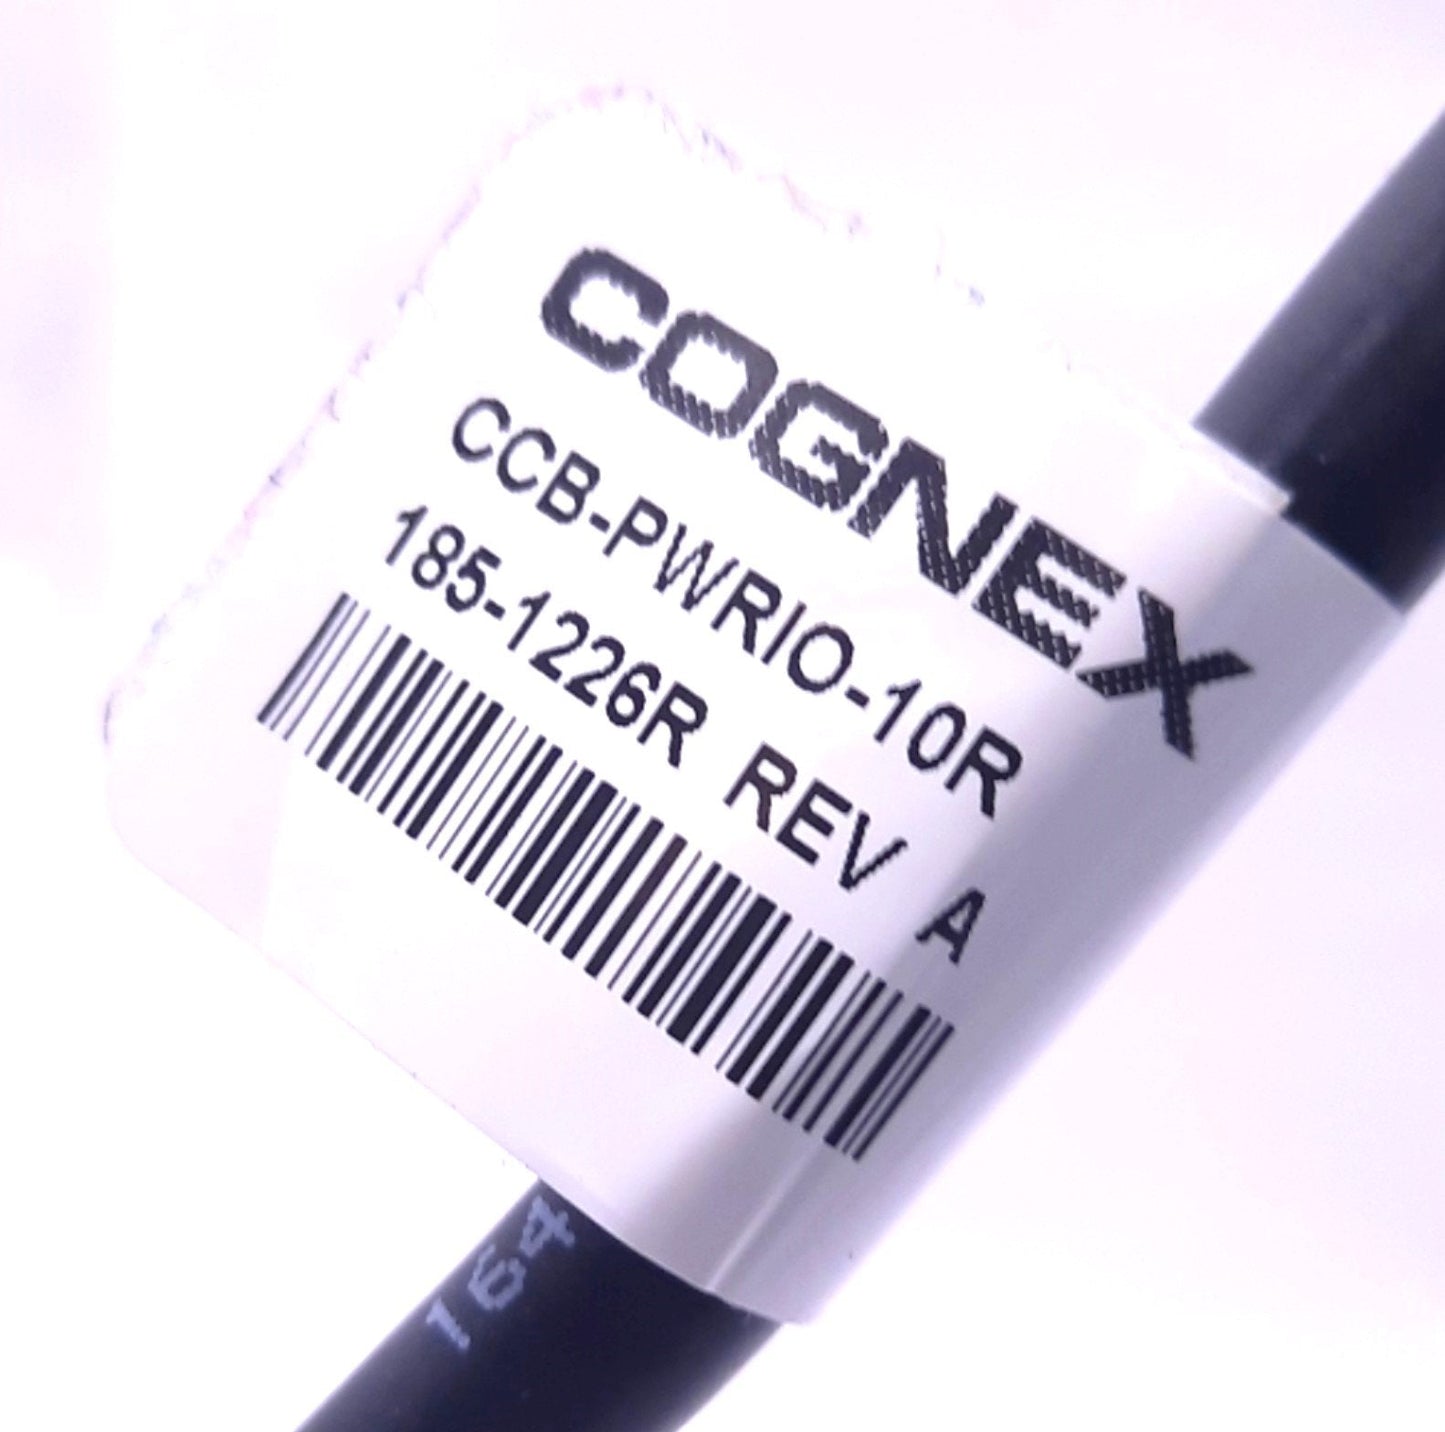 New Cognex CCB-PWRIO-10R In-Sight Vision Power and I/O Module Breakout Cable 10m